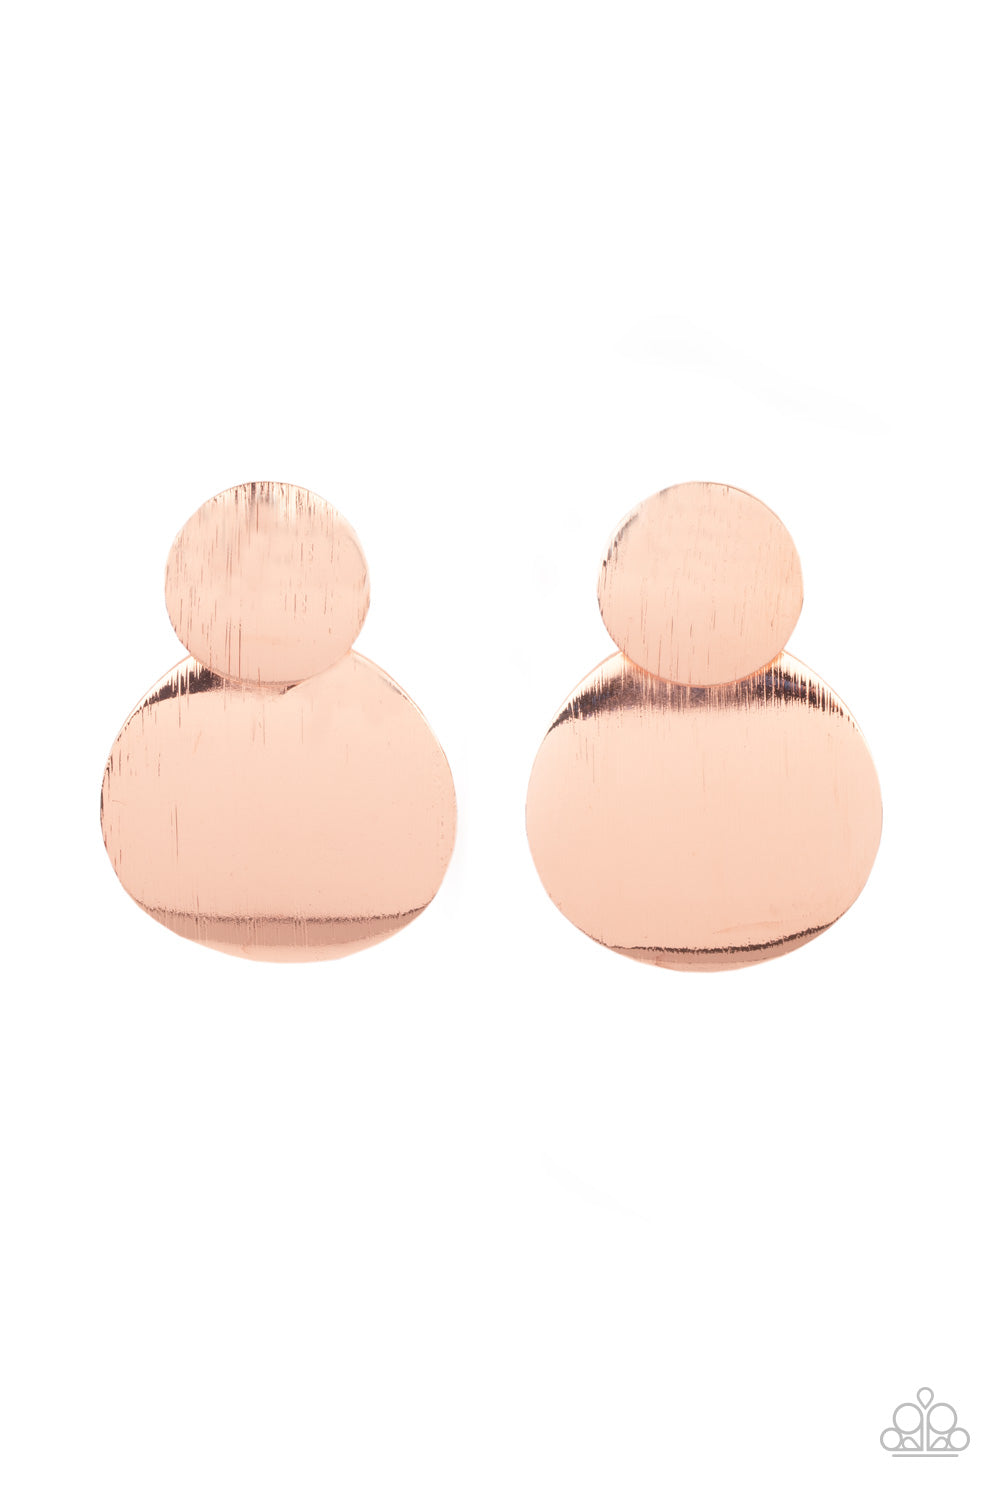 Paparazzi Here Today, GONG Tomorrow Copper Post Earrings - P5PO-CPSH-031XX